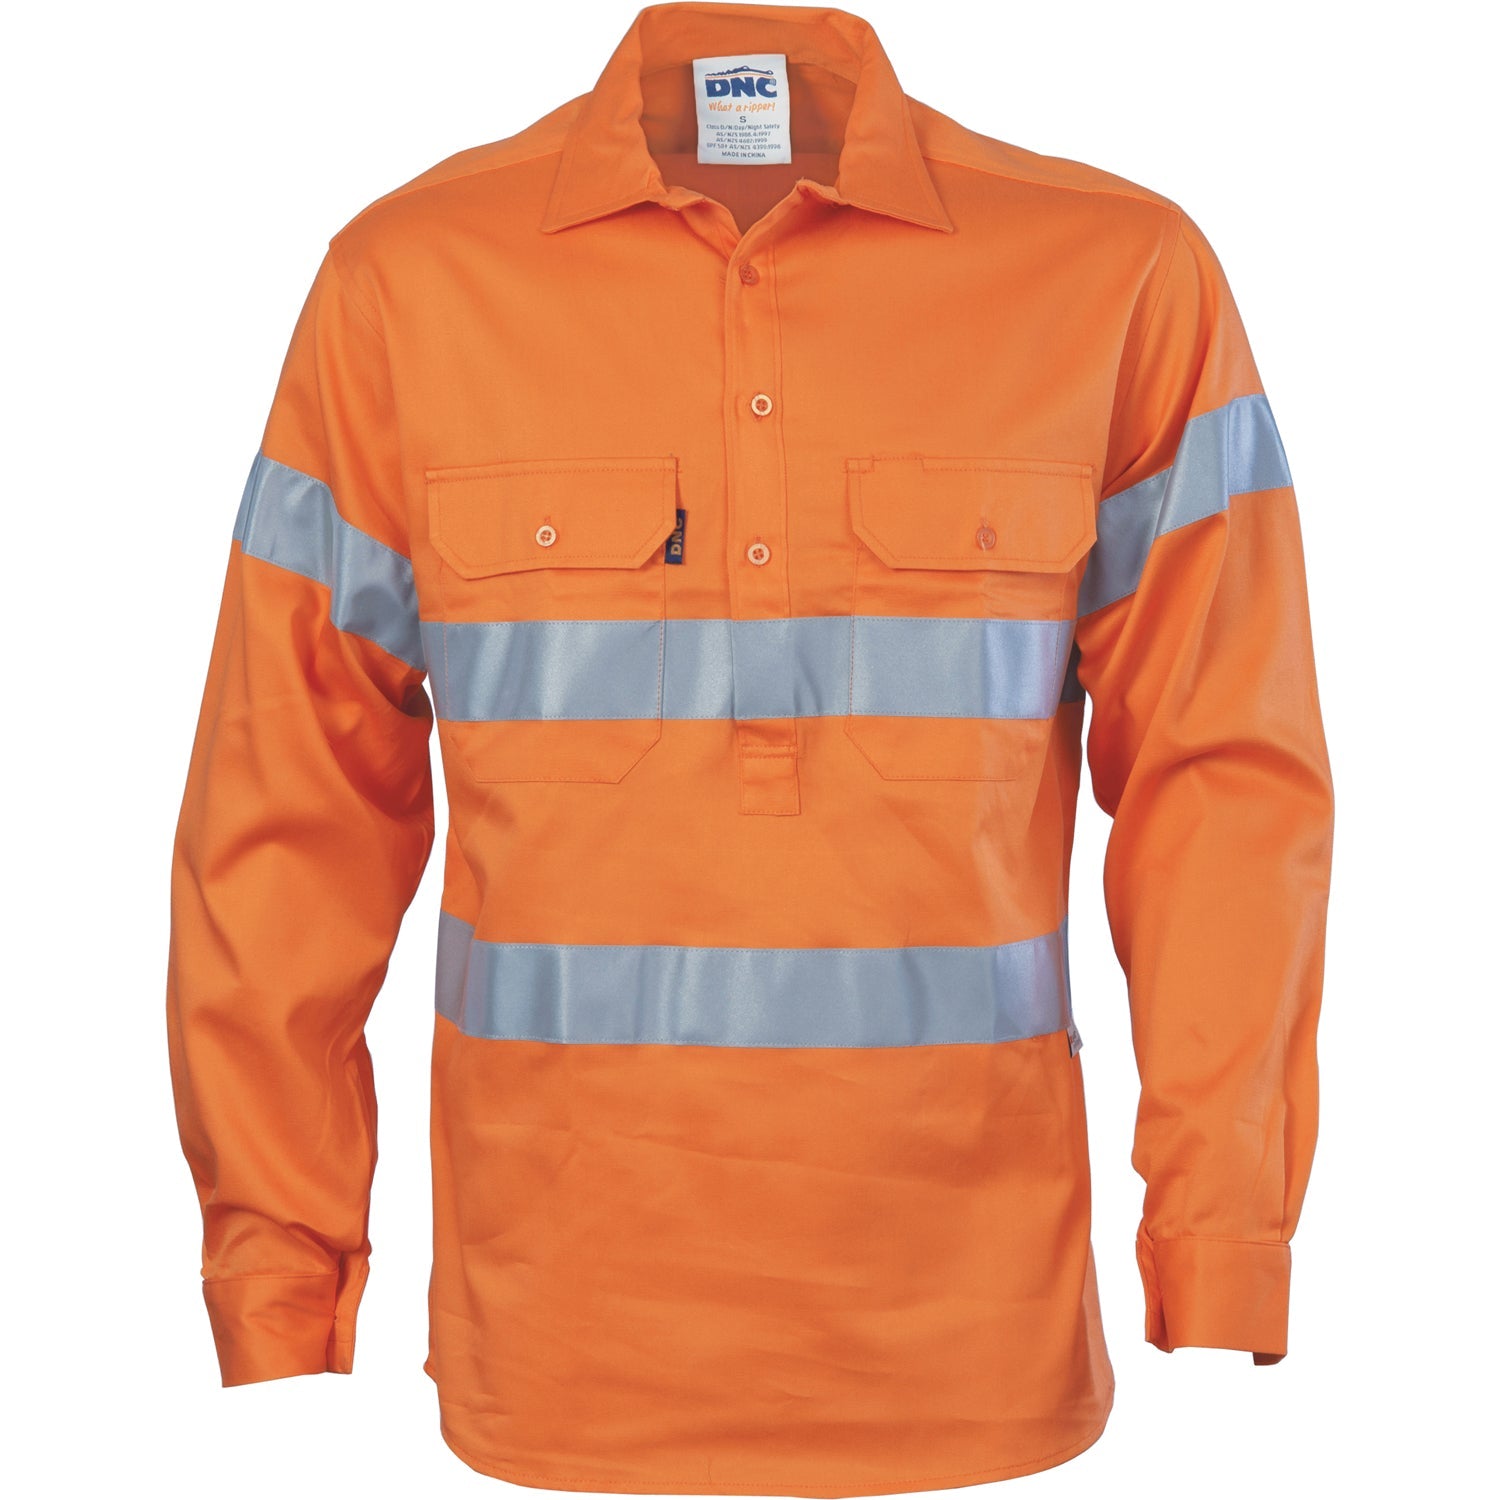 Dnc 3848 Hivis Close Front Cotton Drill Shirt With 3m R/tape